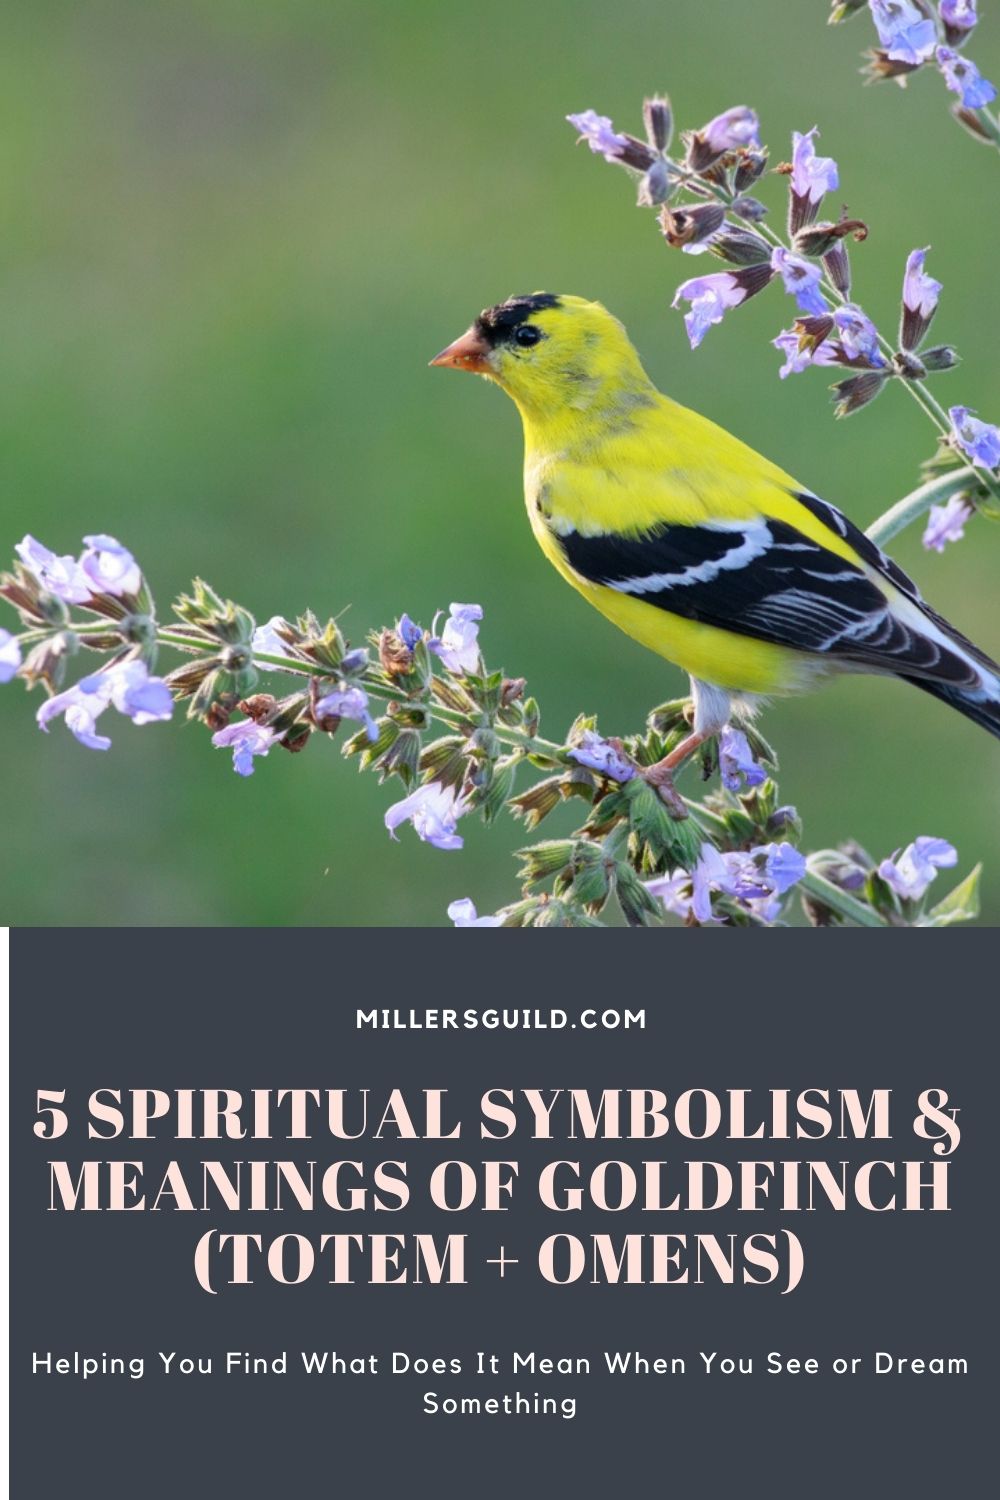 5 Spiritual Symbolism & Meanings of Goldfinch (Totem + Omens) 2